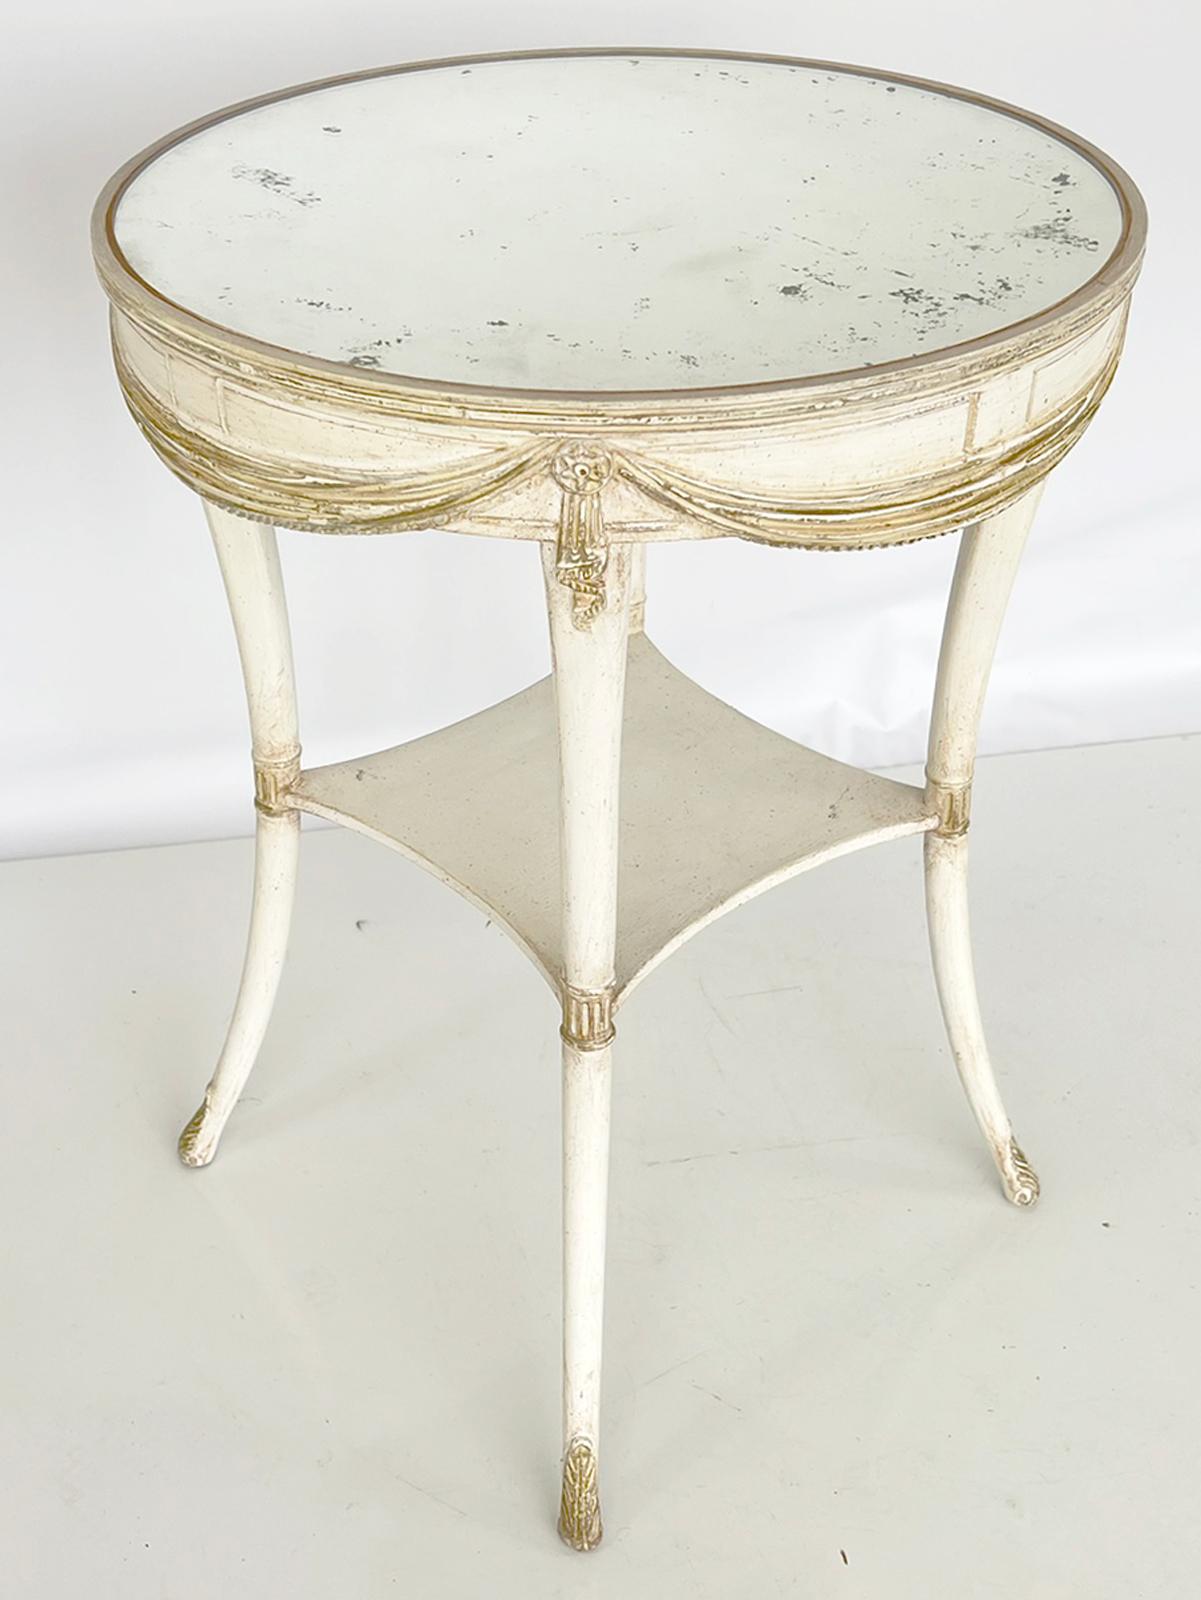 Round candlestand table, having an aged mirrored top, on painted table base, its apron decorated with carved swags centered between draped rosettes. The table is raised on four, round, tapering, splayed legs, joined by a shelf stretcher with concave